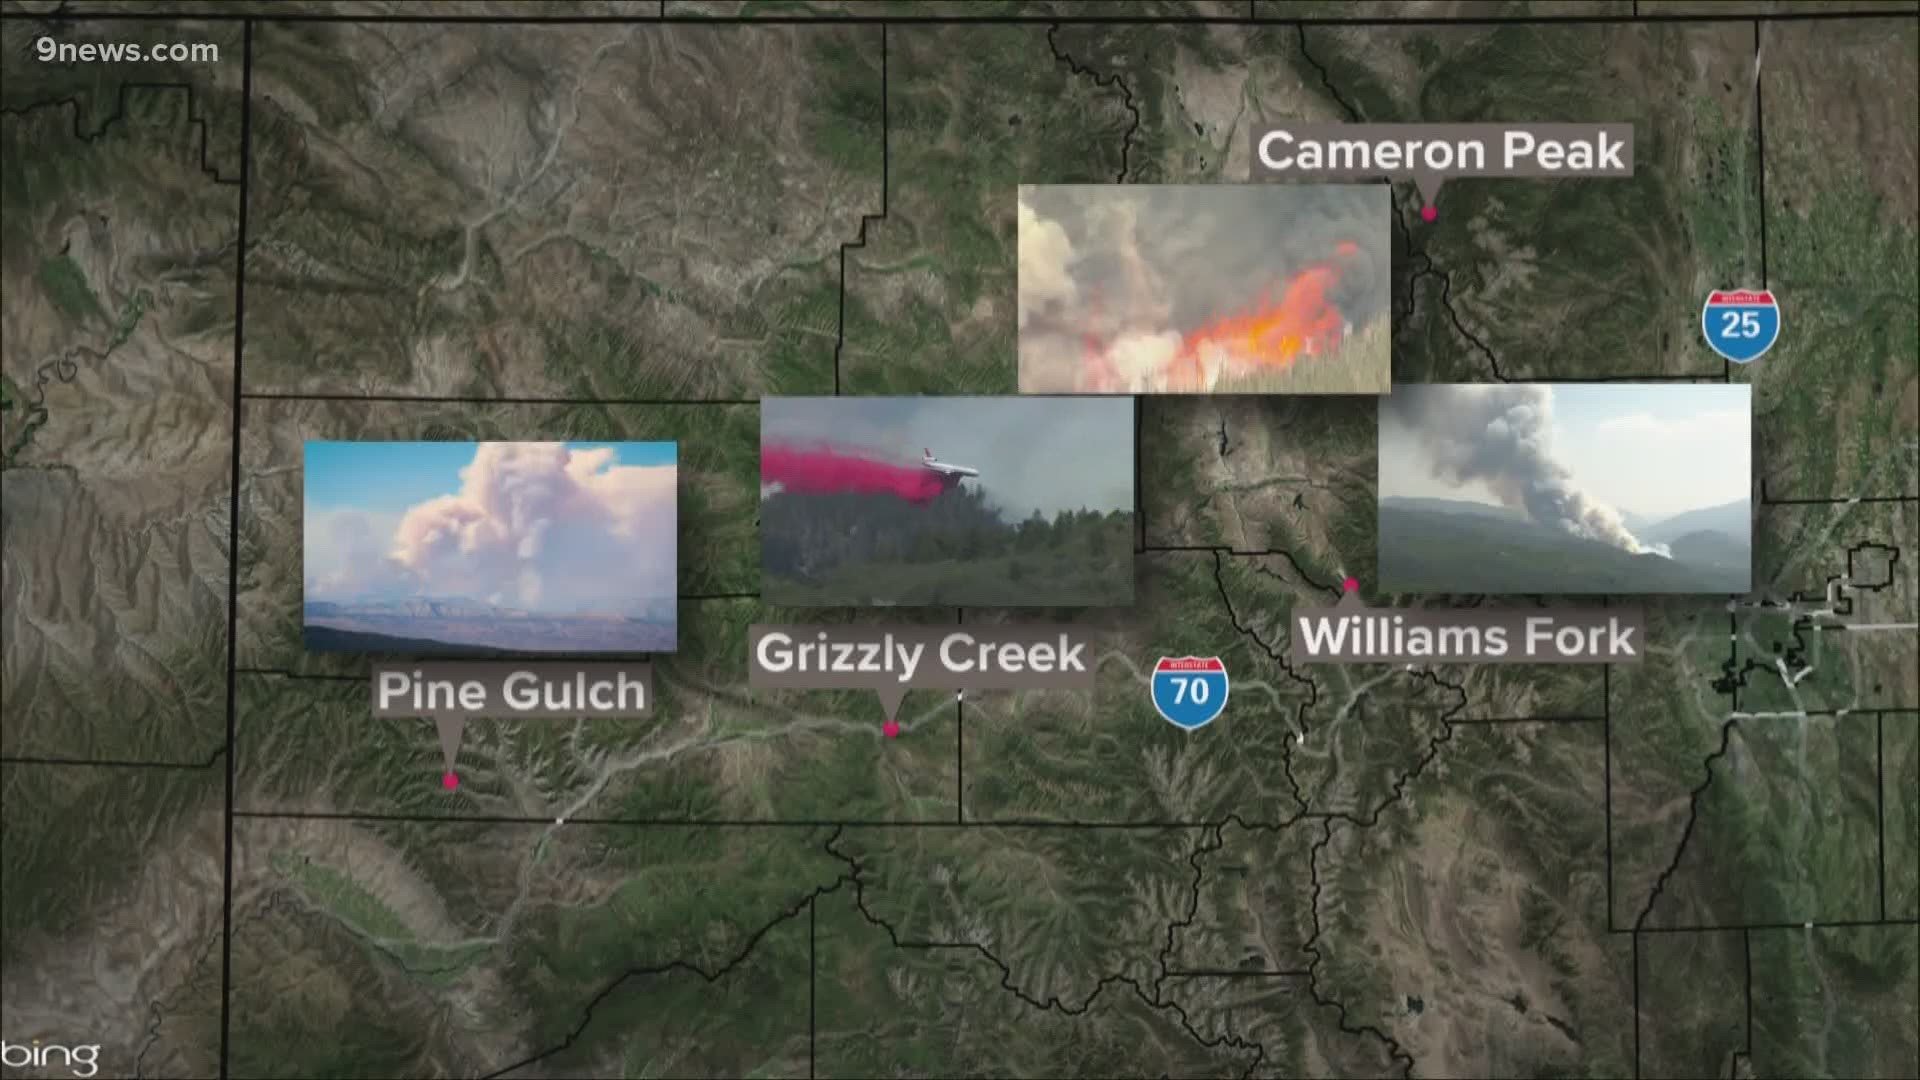 The Pine Gulch Fire north of Grand Junction has grown to become one of the largest in the history of the state.